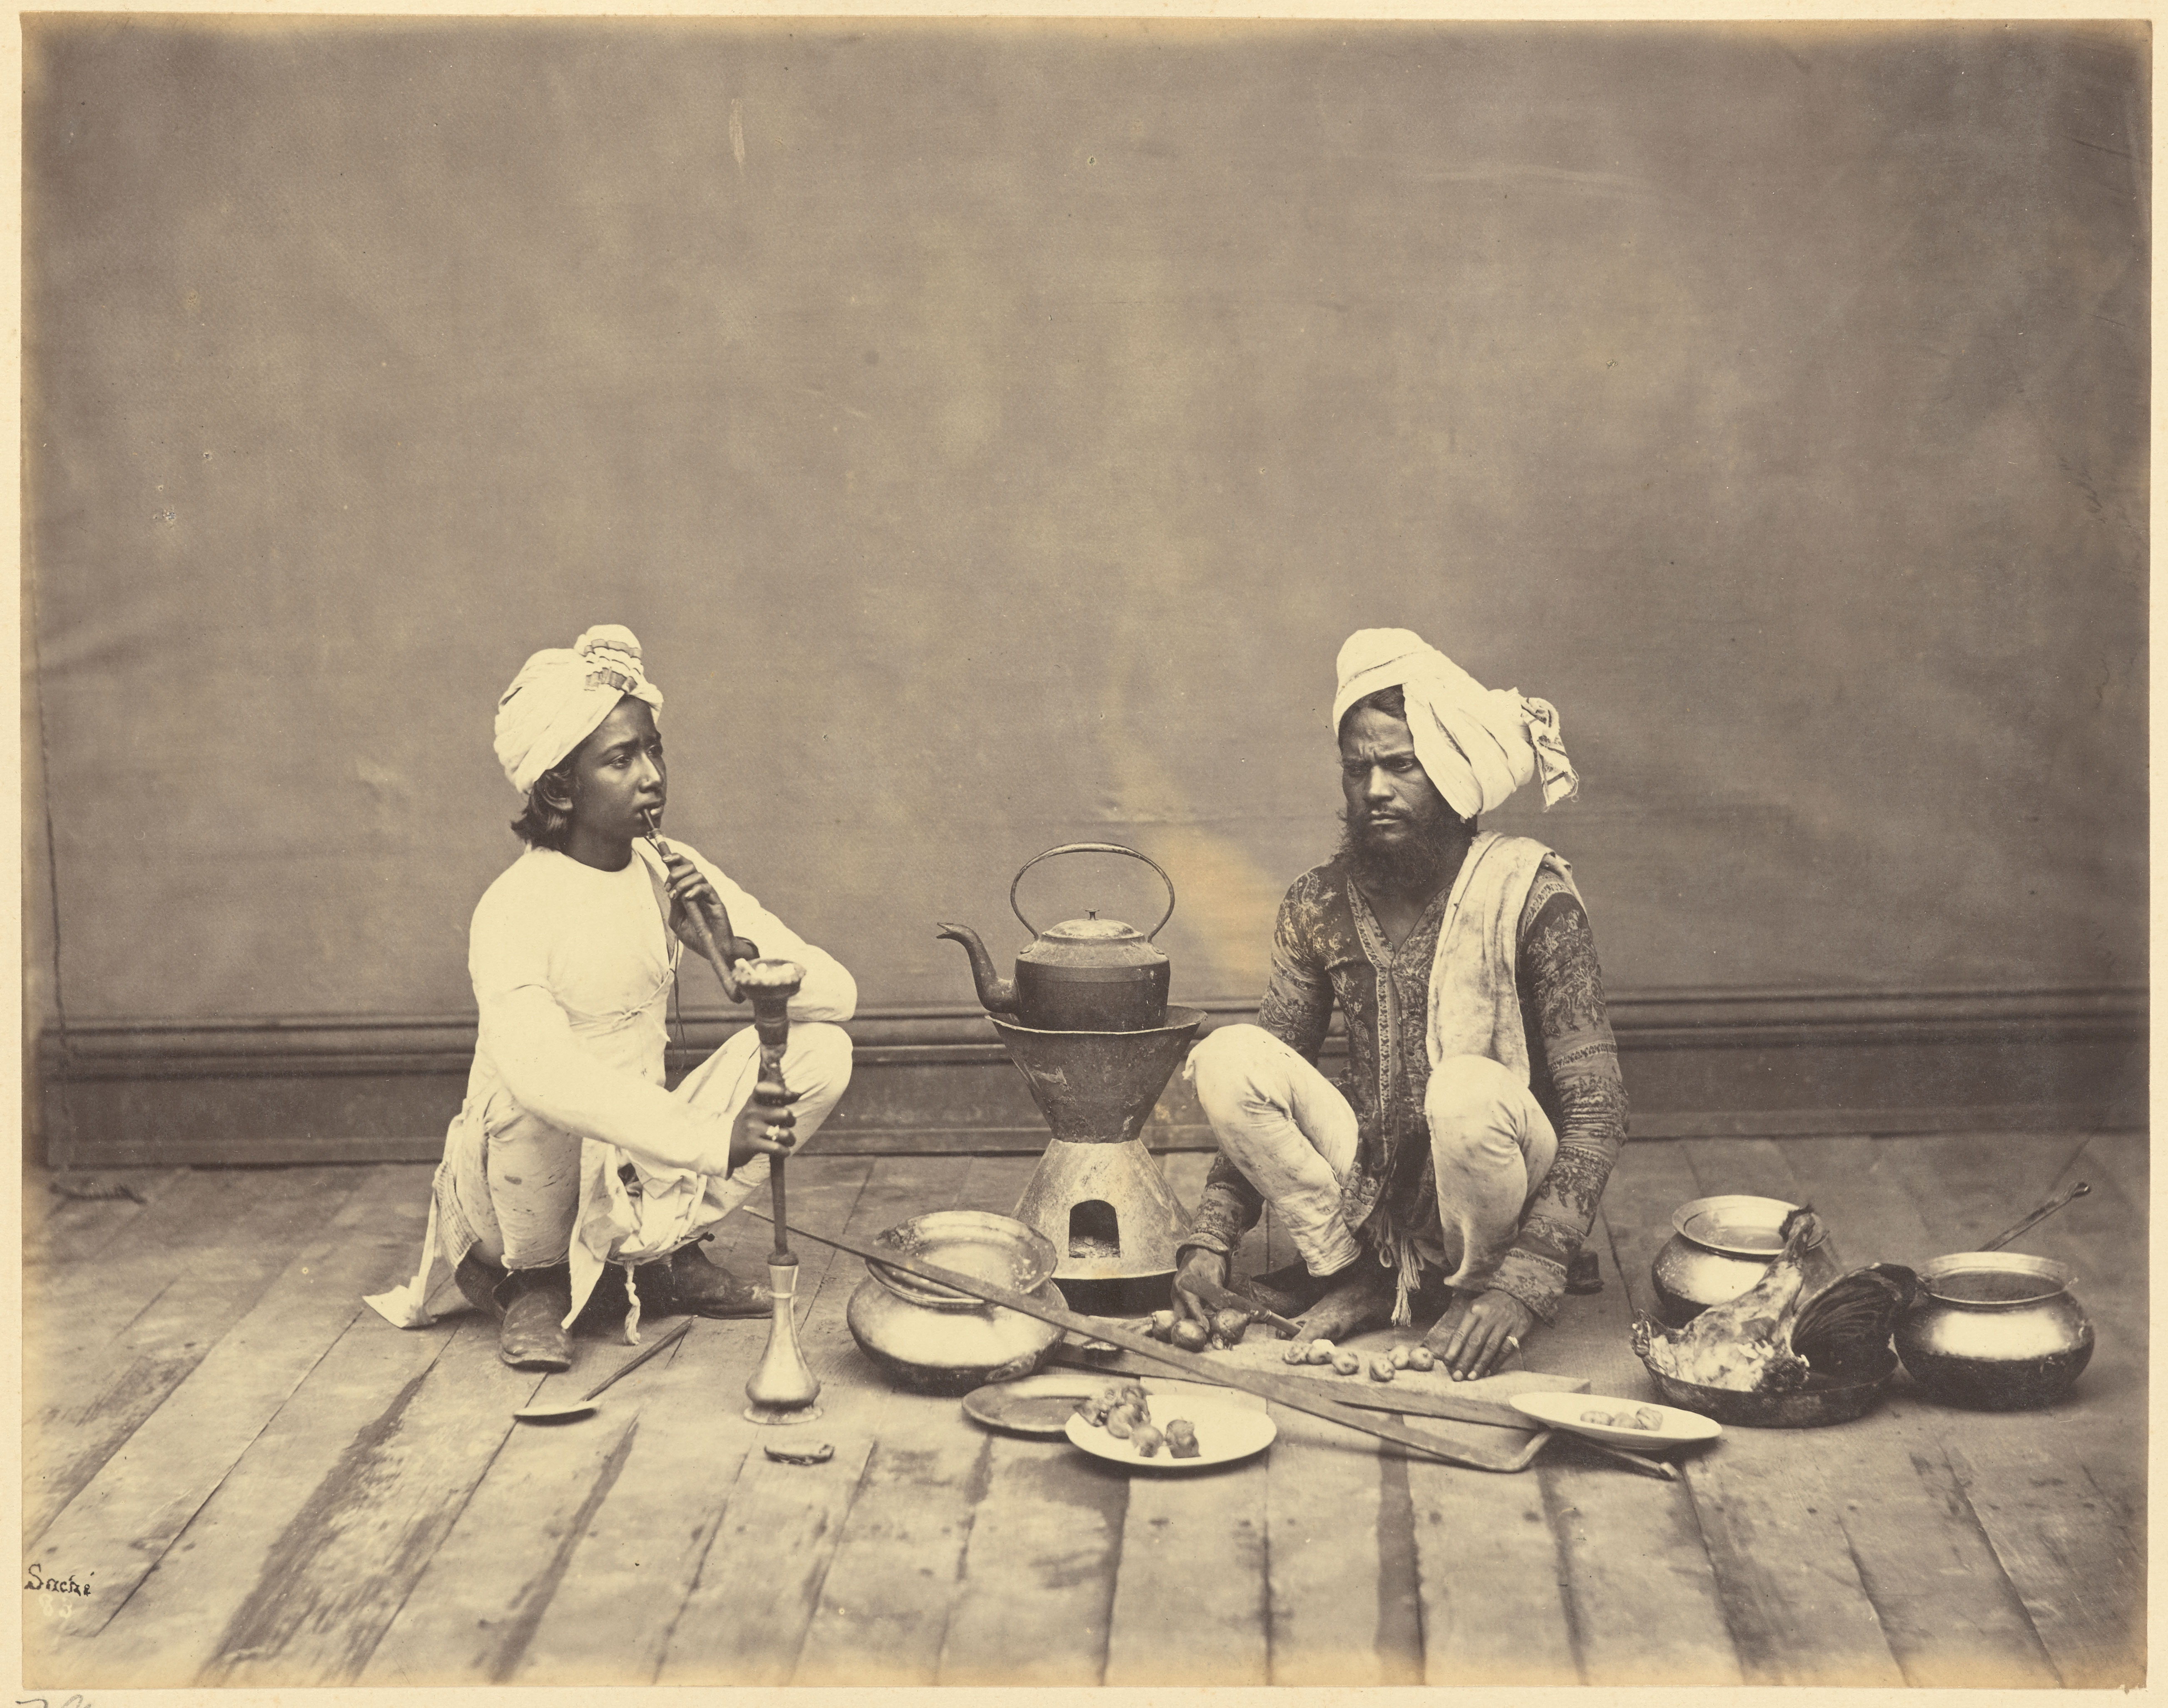 Studio Portrait Of Two Men With Cooking Utensils And Ingredients - Circa 1860s